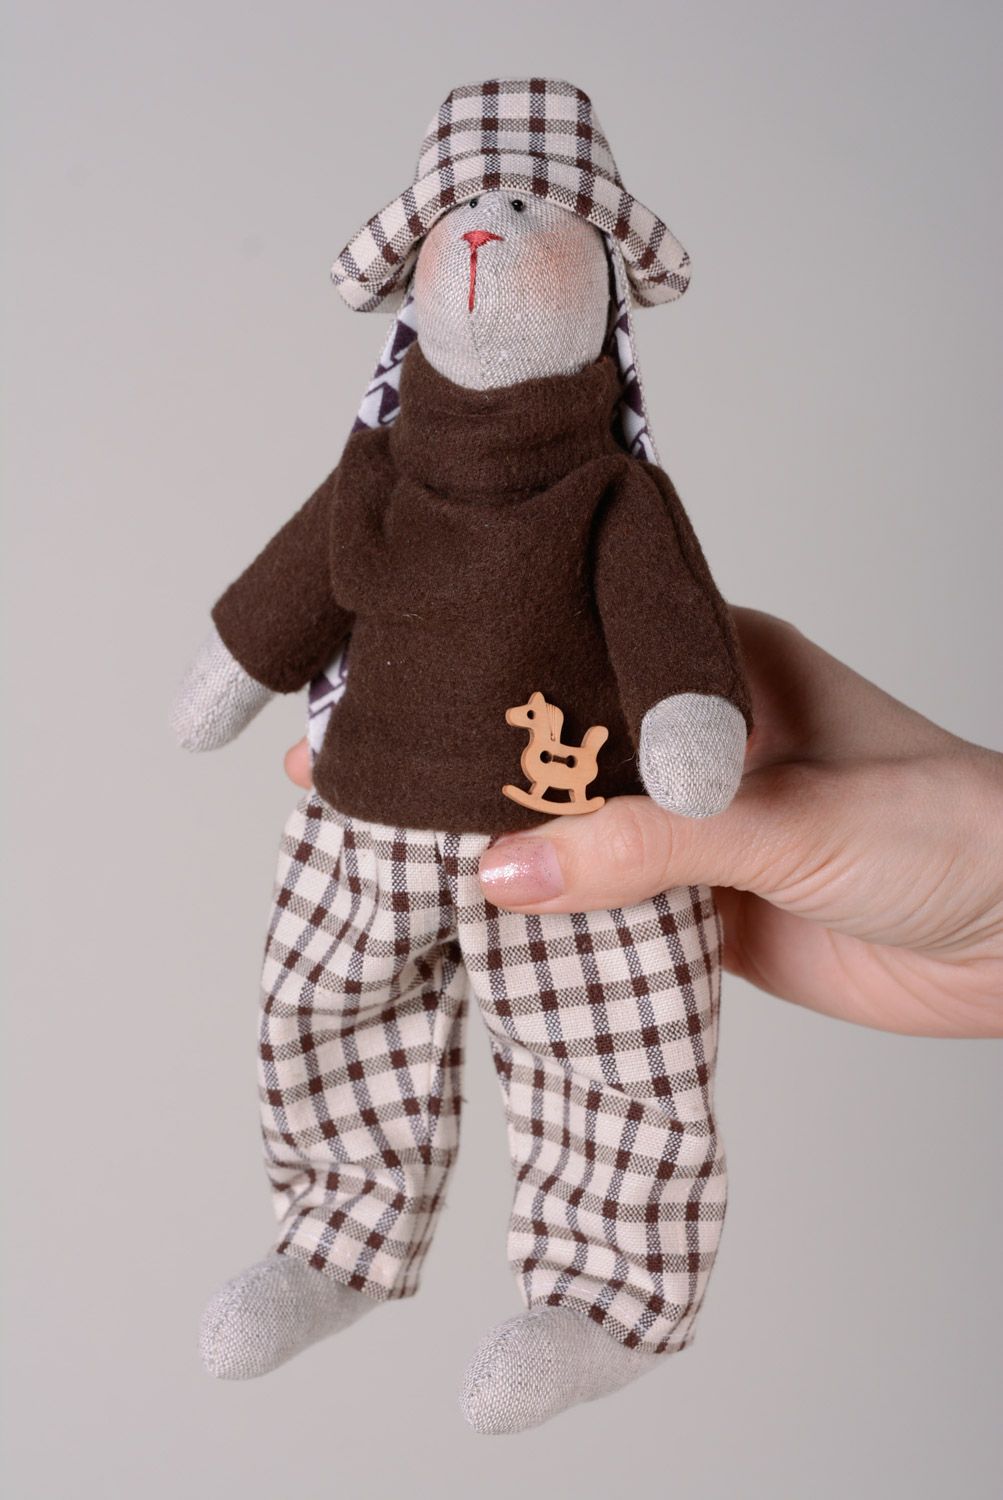 Handmade soft toy sewn of linen and fleece rabbit in checkered suit and hat photo 4